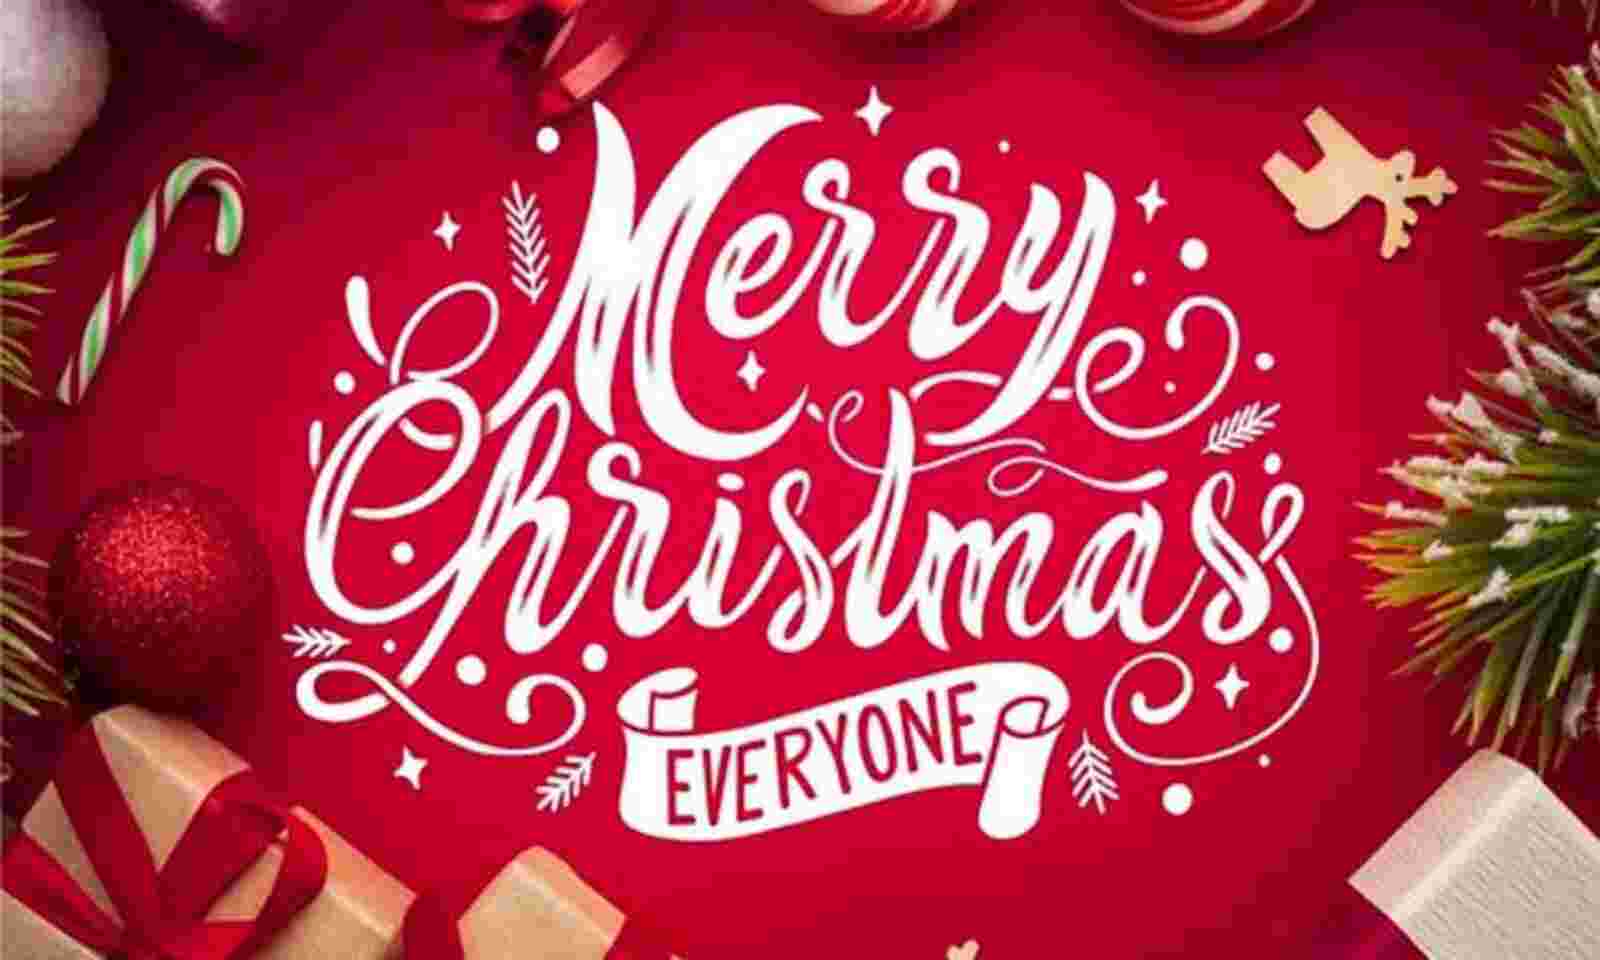 Merry christmas to all